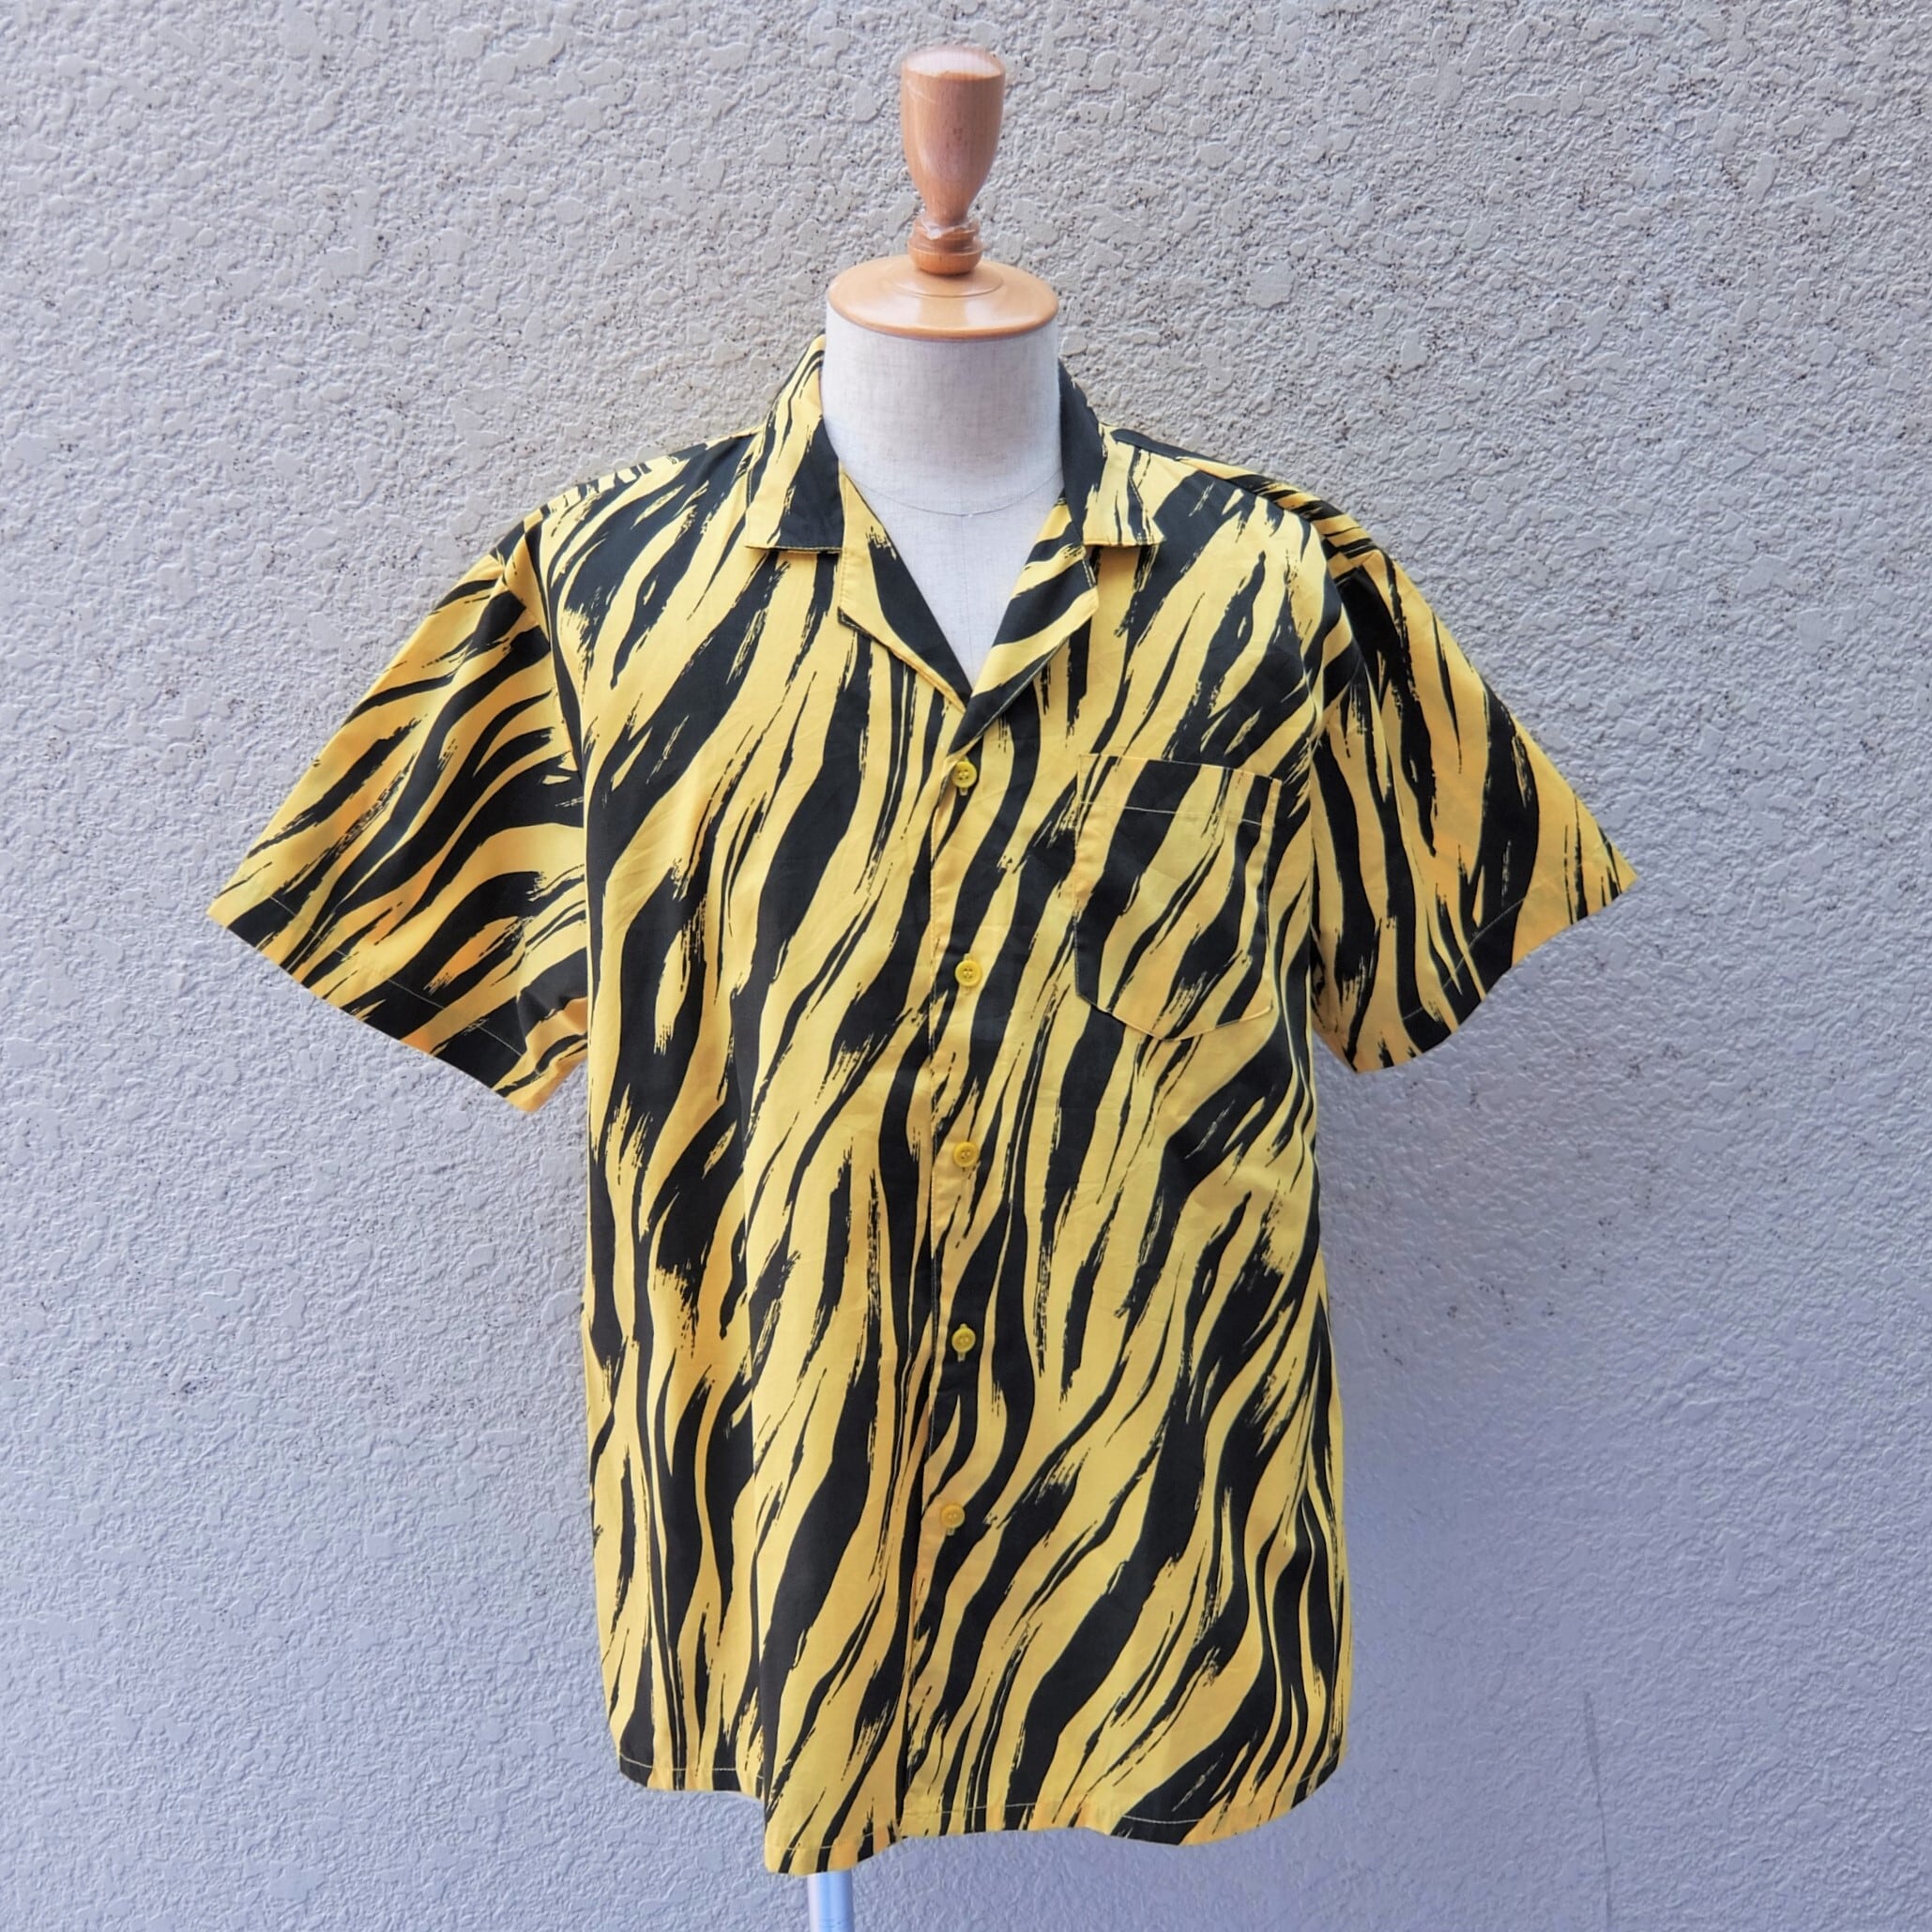 Tiger pattern Shirt／トラ模様 総柄 シャツ | BIG TIME ｜ヴィンテージ 古着 BIGTIME（ビッグタイム）  powered by BASE